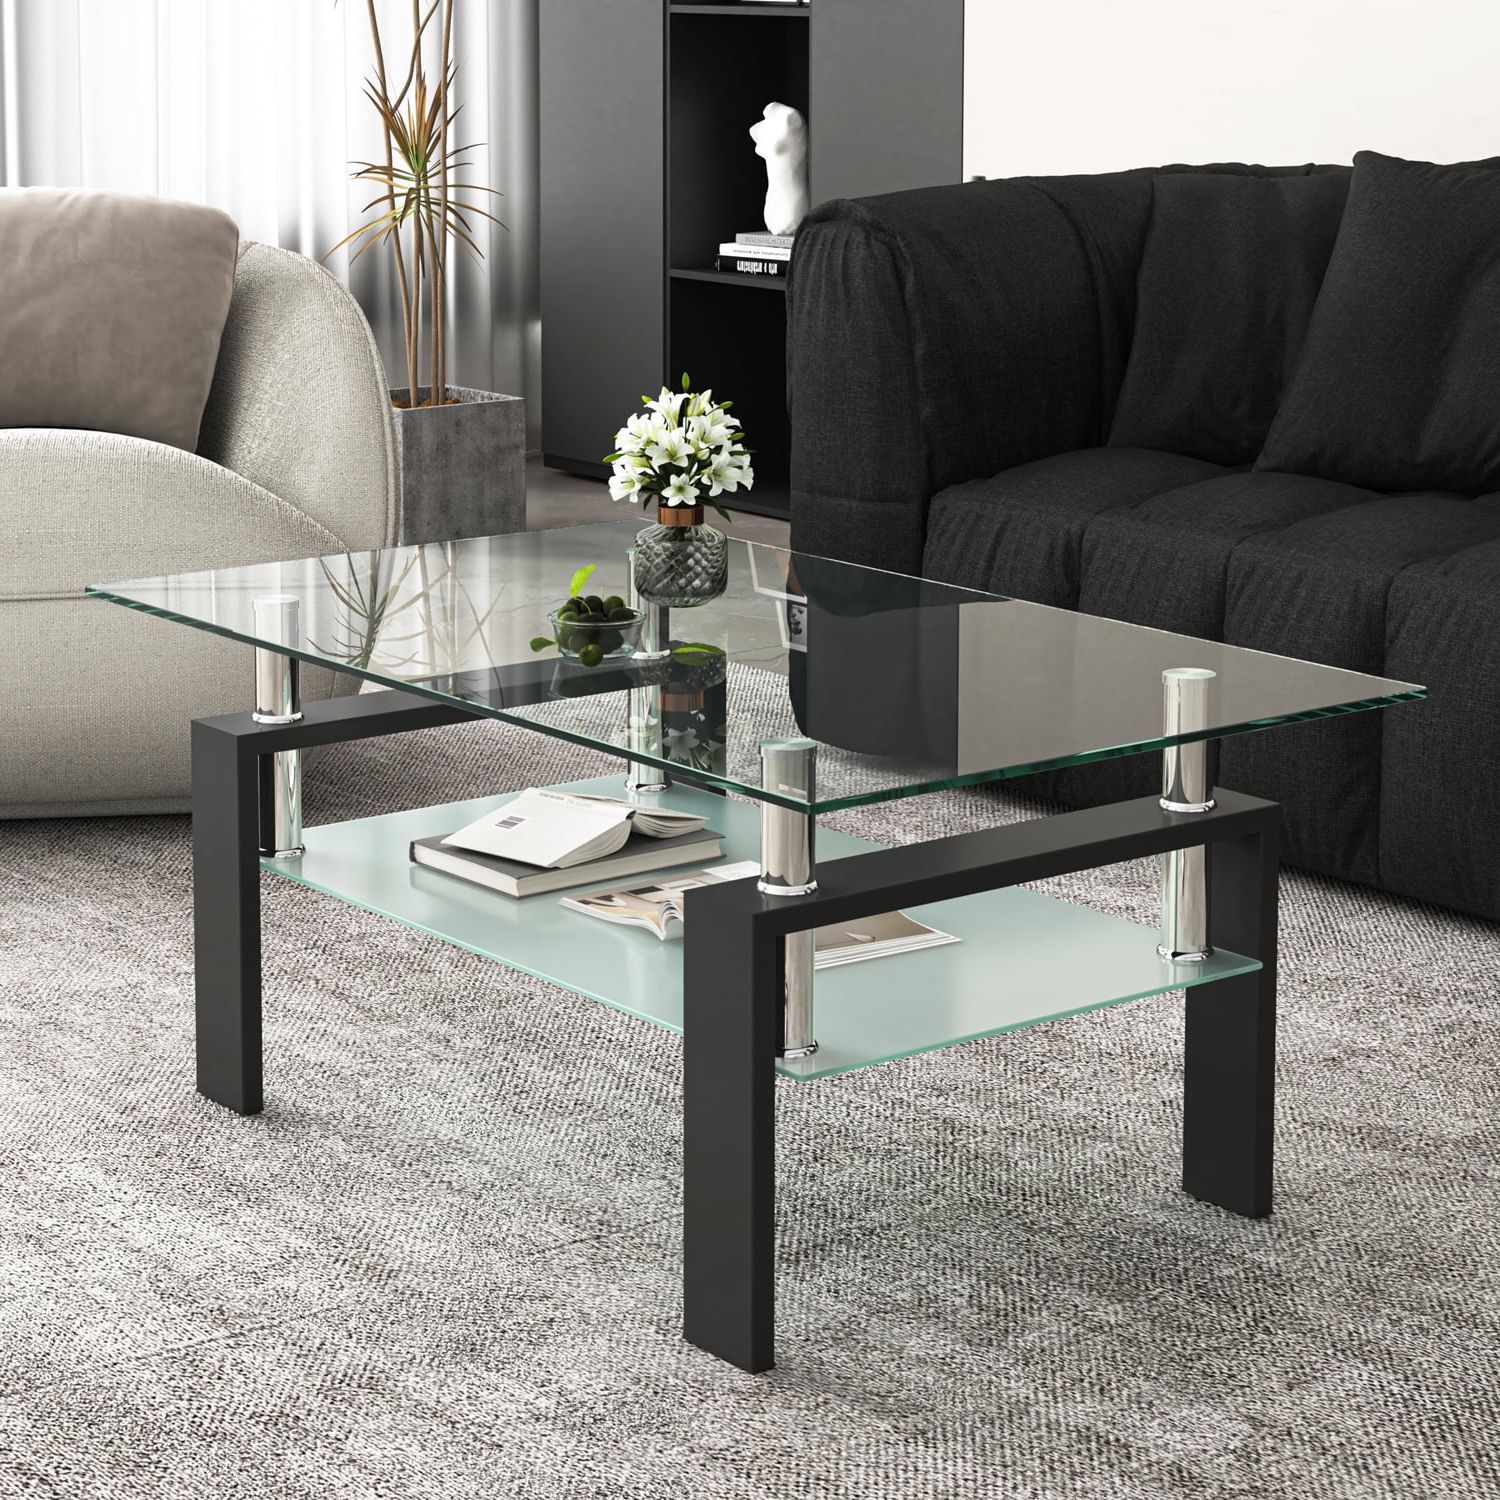 Most Recently Released Wood Tempered Glass Top Coffee Tables Intended For Hommoo Rectangular Glass Coffee Table, Wood Tempered Glass Top Coffee Table  Rectangular W/ Shelf Home Furniture, Center Table Sofa Table Home Furniture  For Living Room, Black – Walmart (Photo 6 of 10)